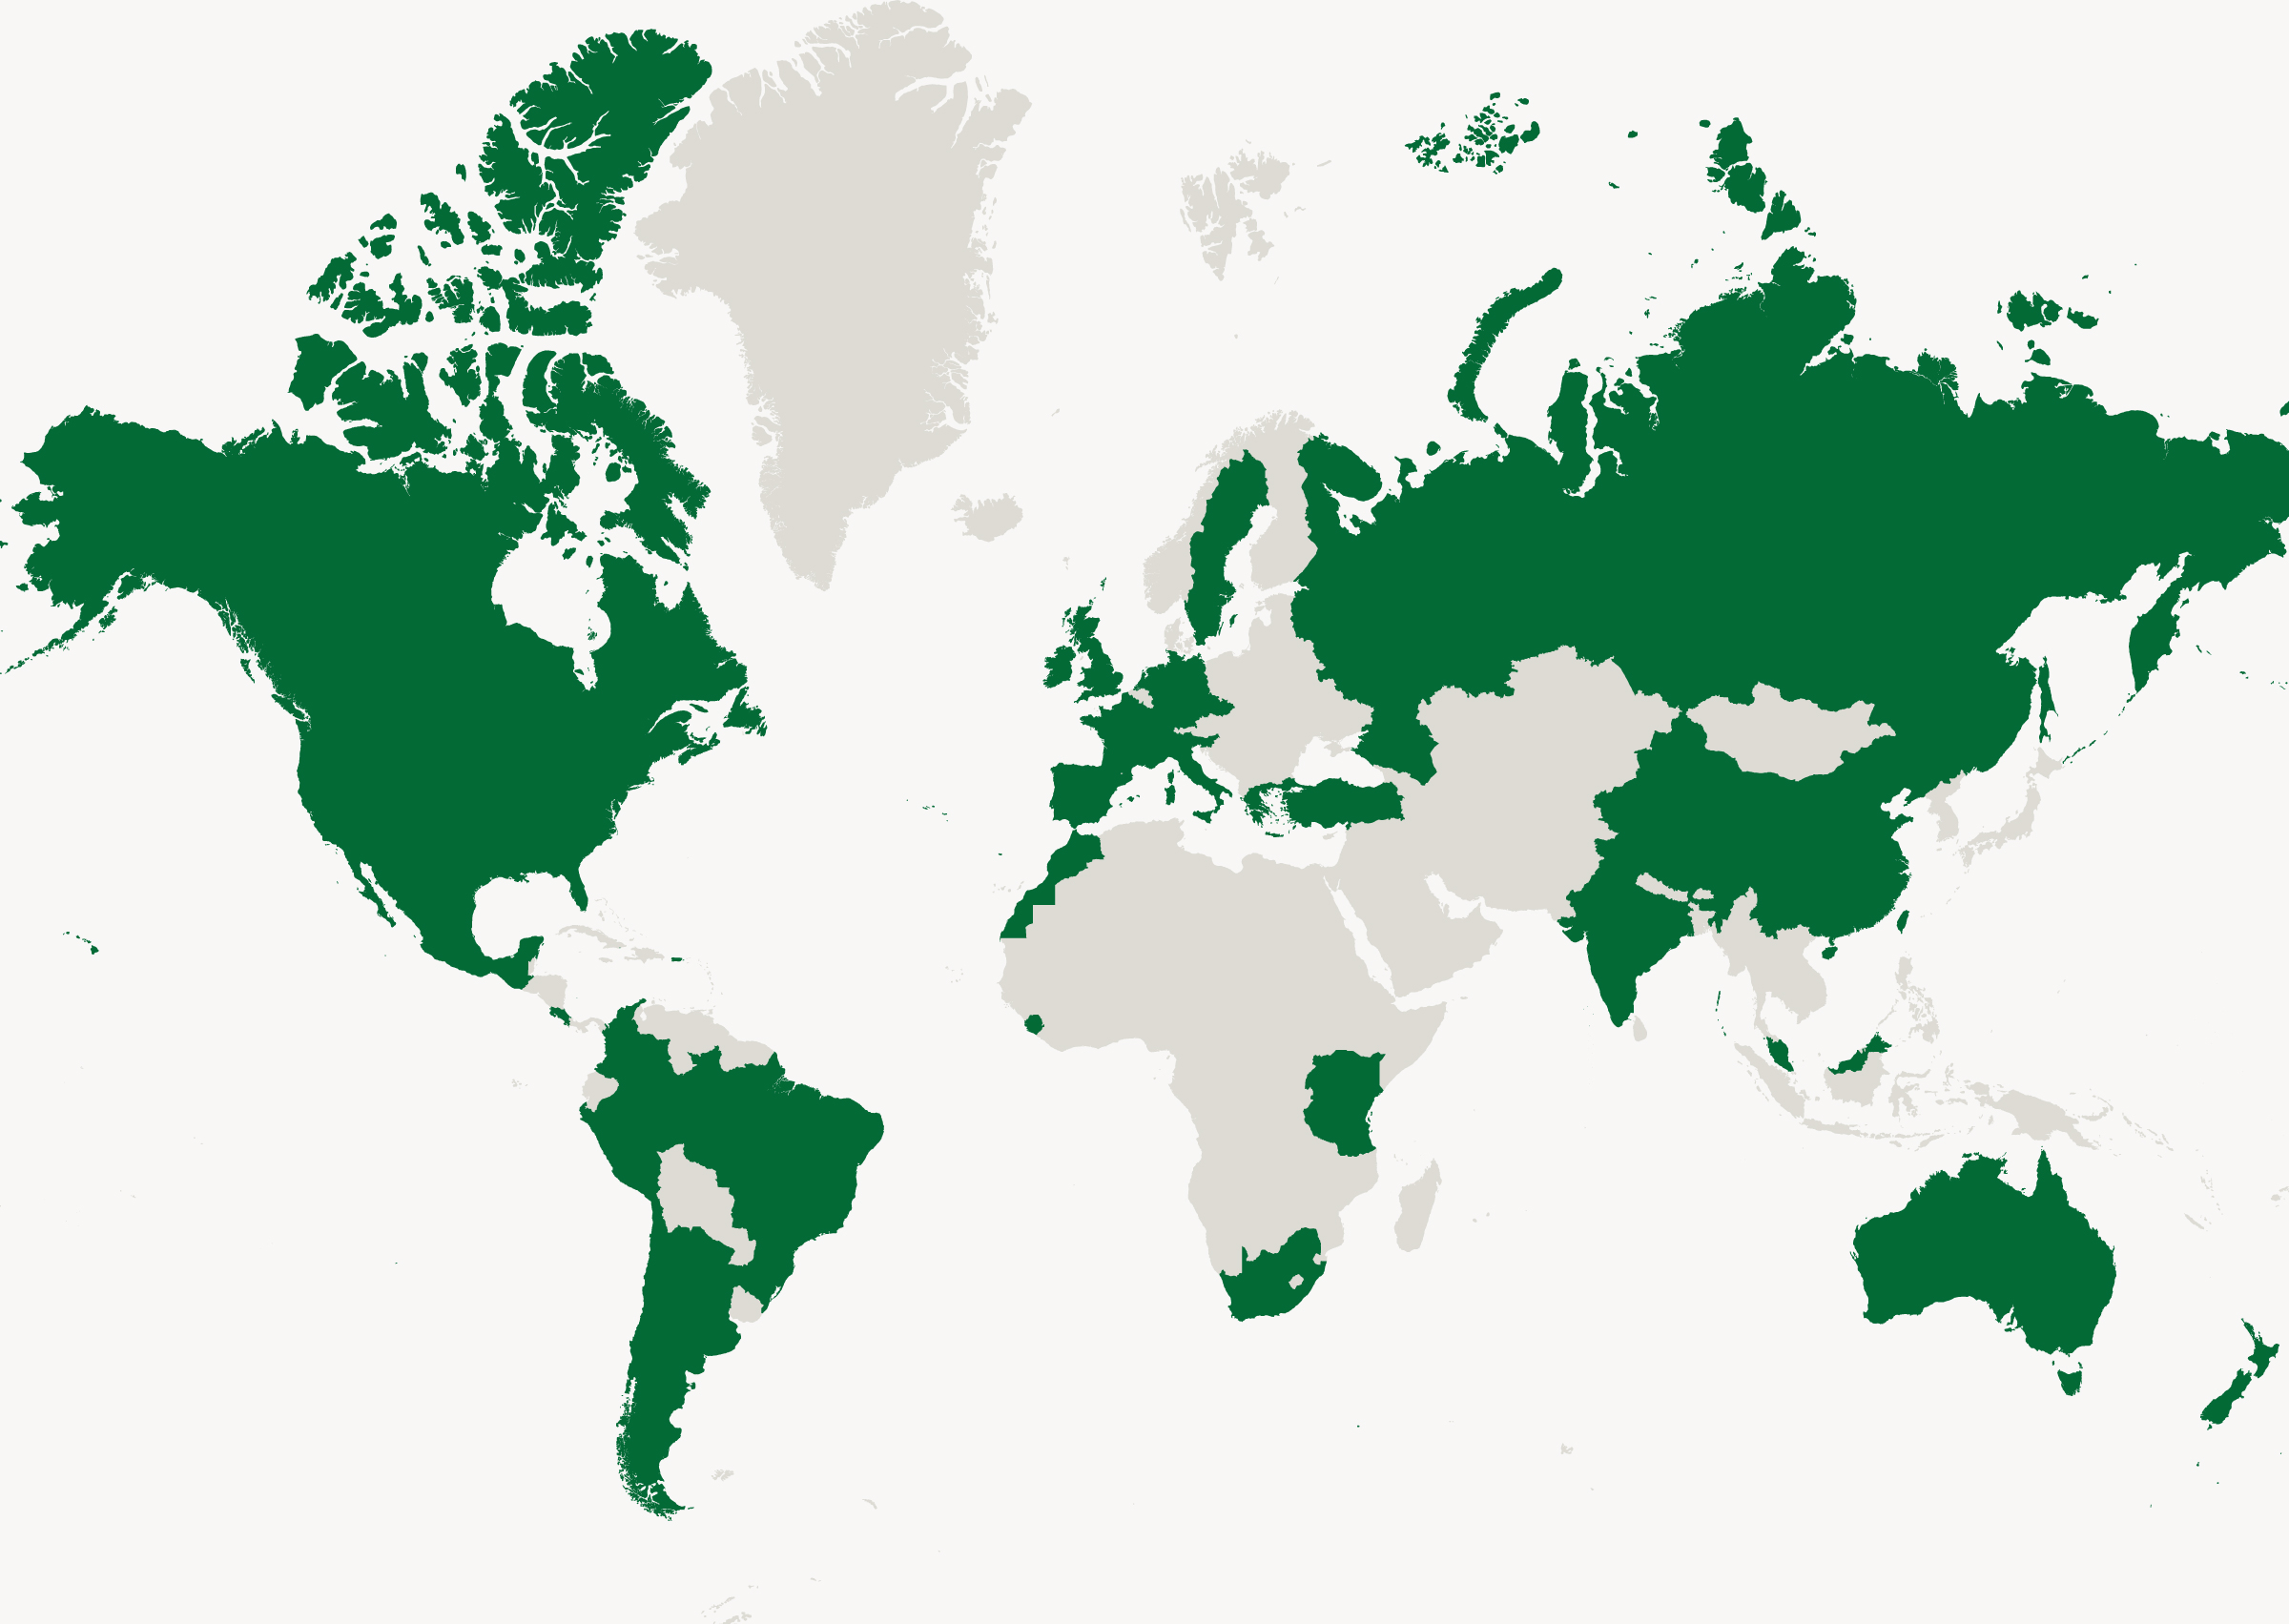 map view of Arbor Day Foundation's international community planting partners